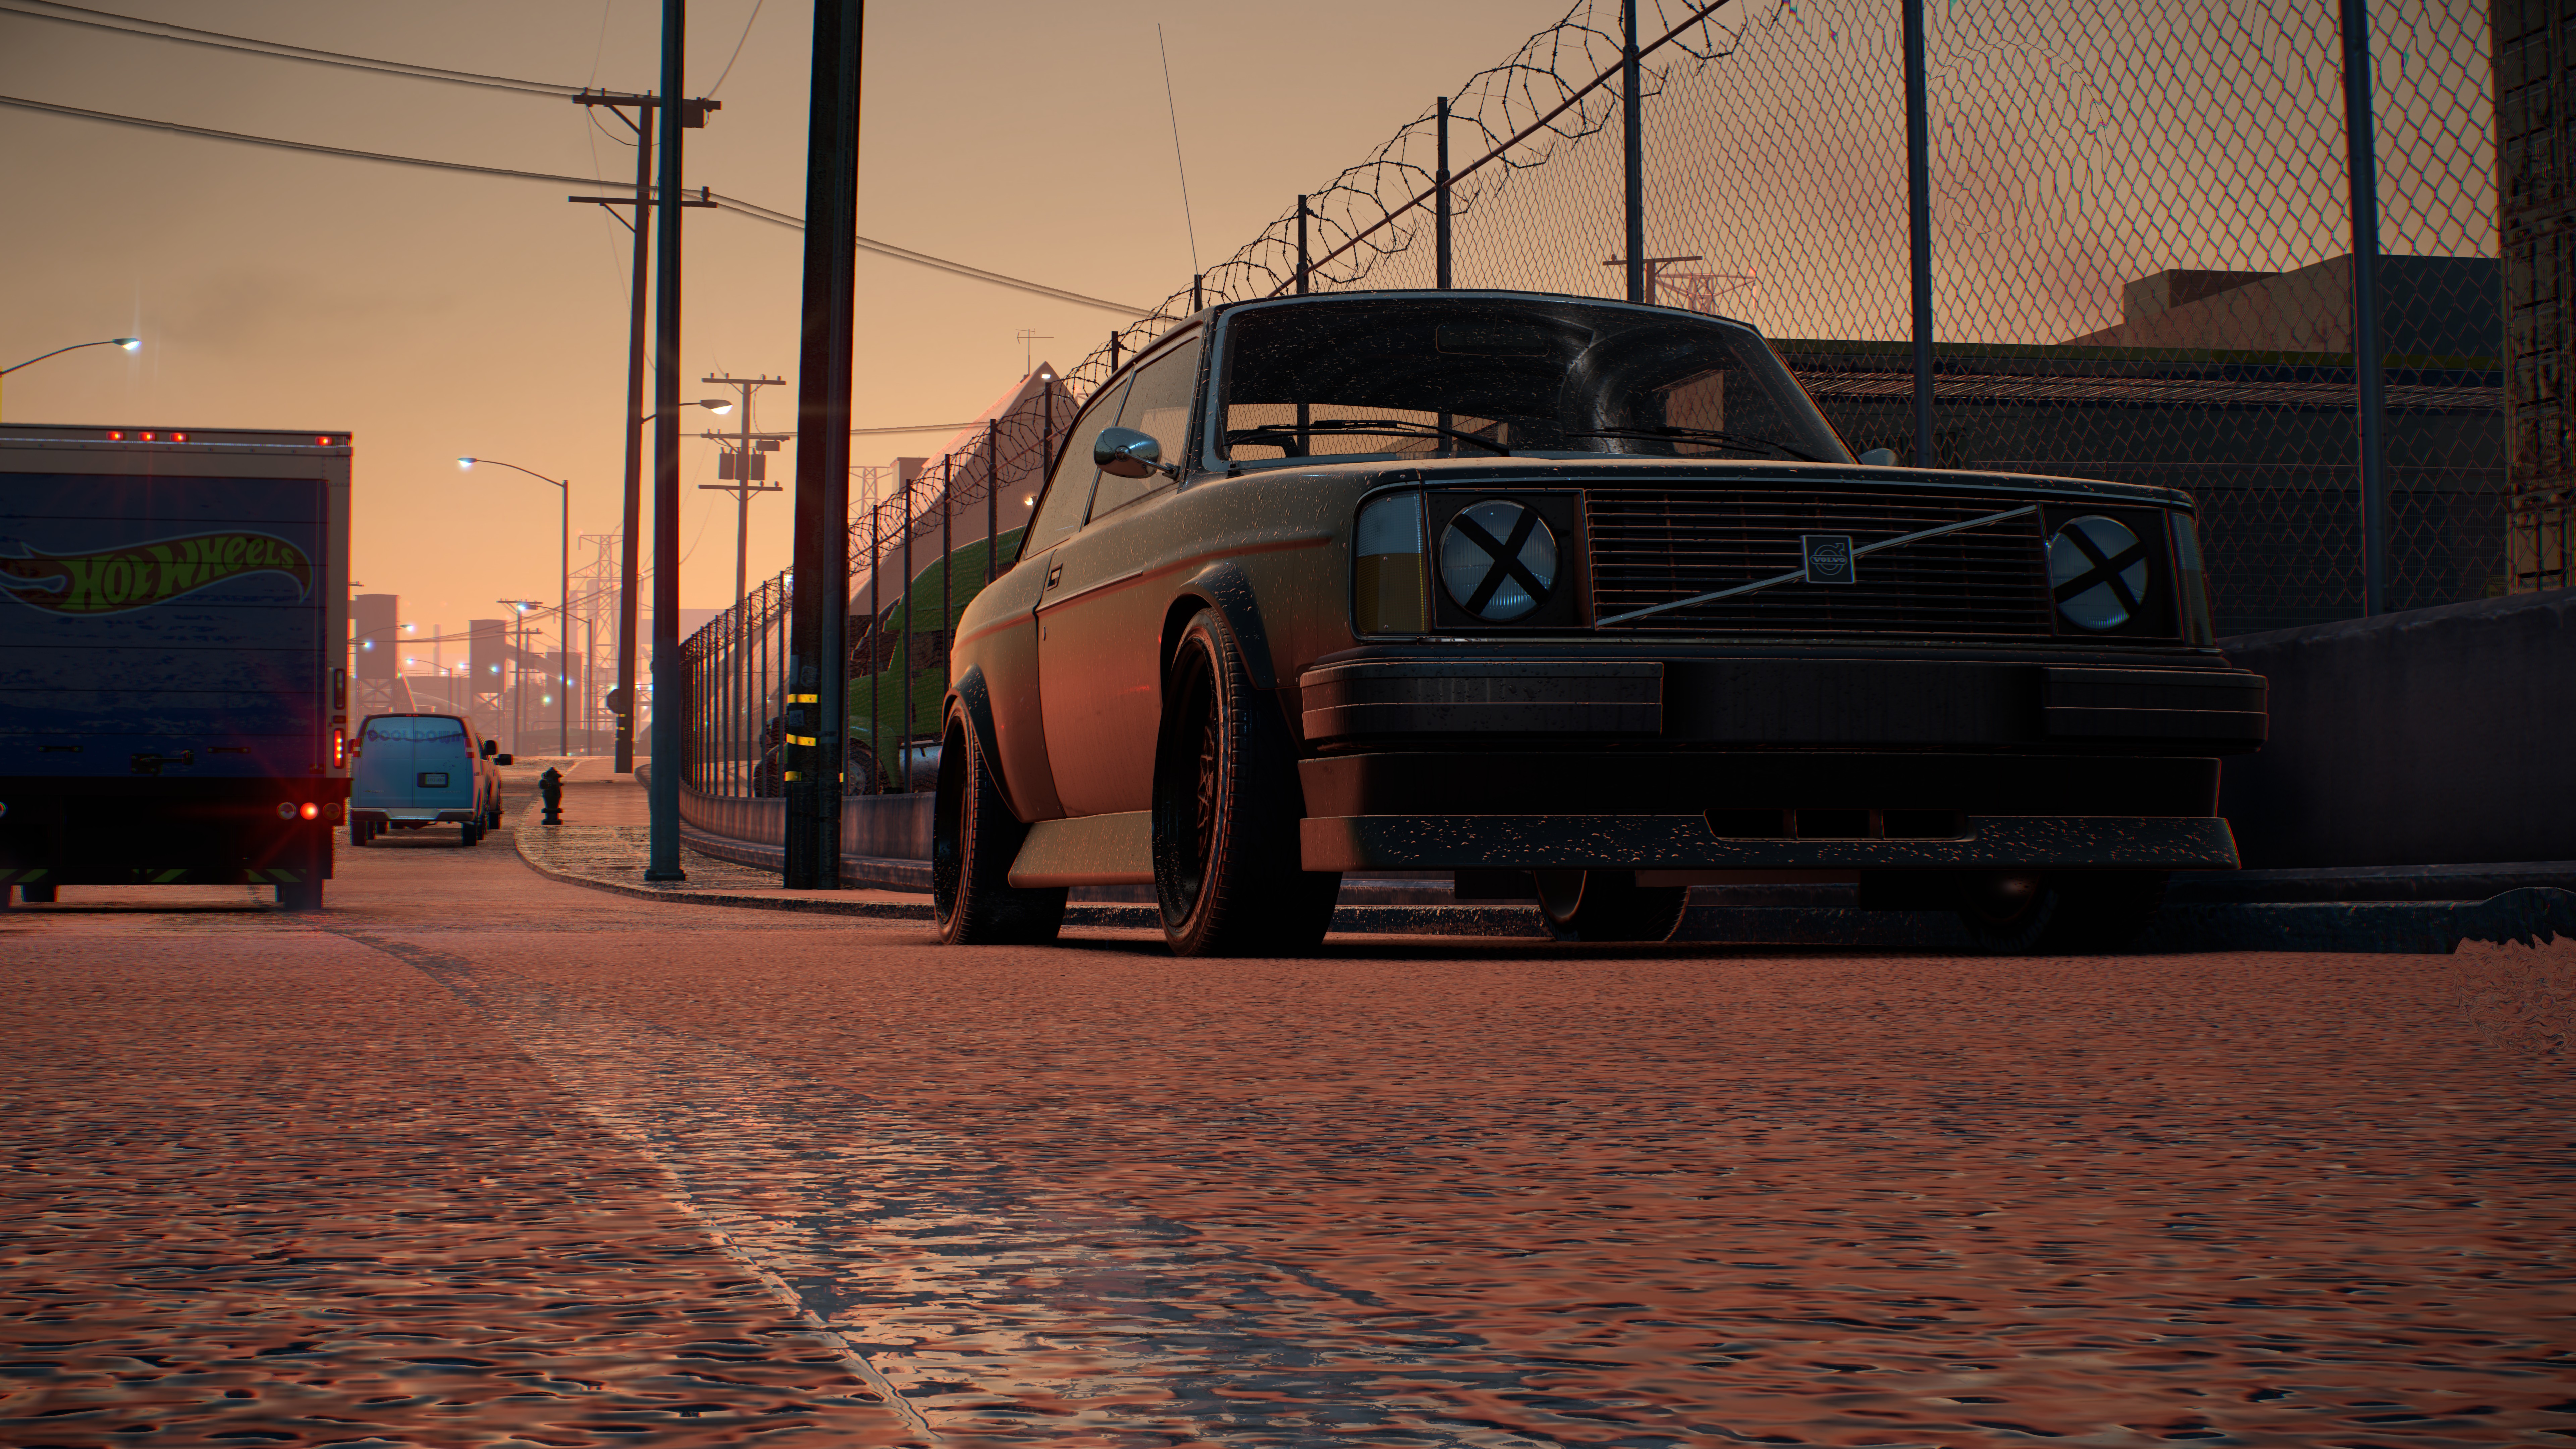 Volvo Need For Speed PC Gaming Console Car Street Volvo 240 Worms Eye View 7680x4320